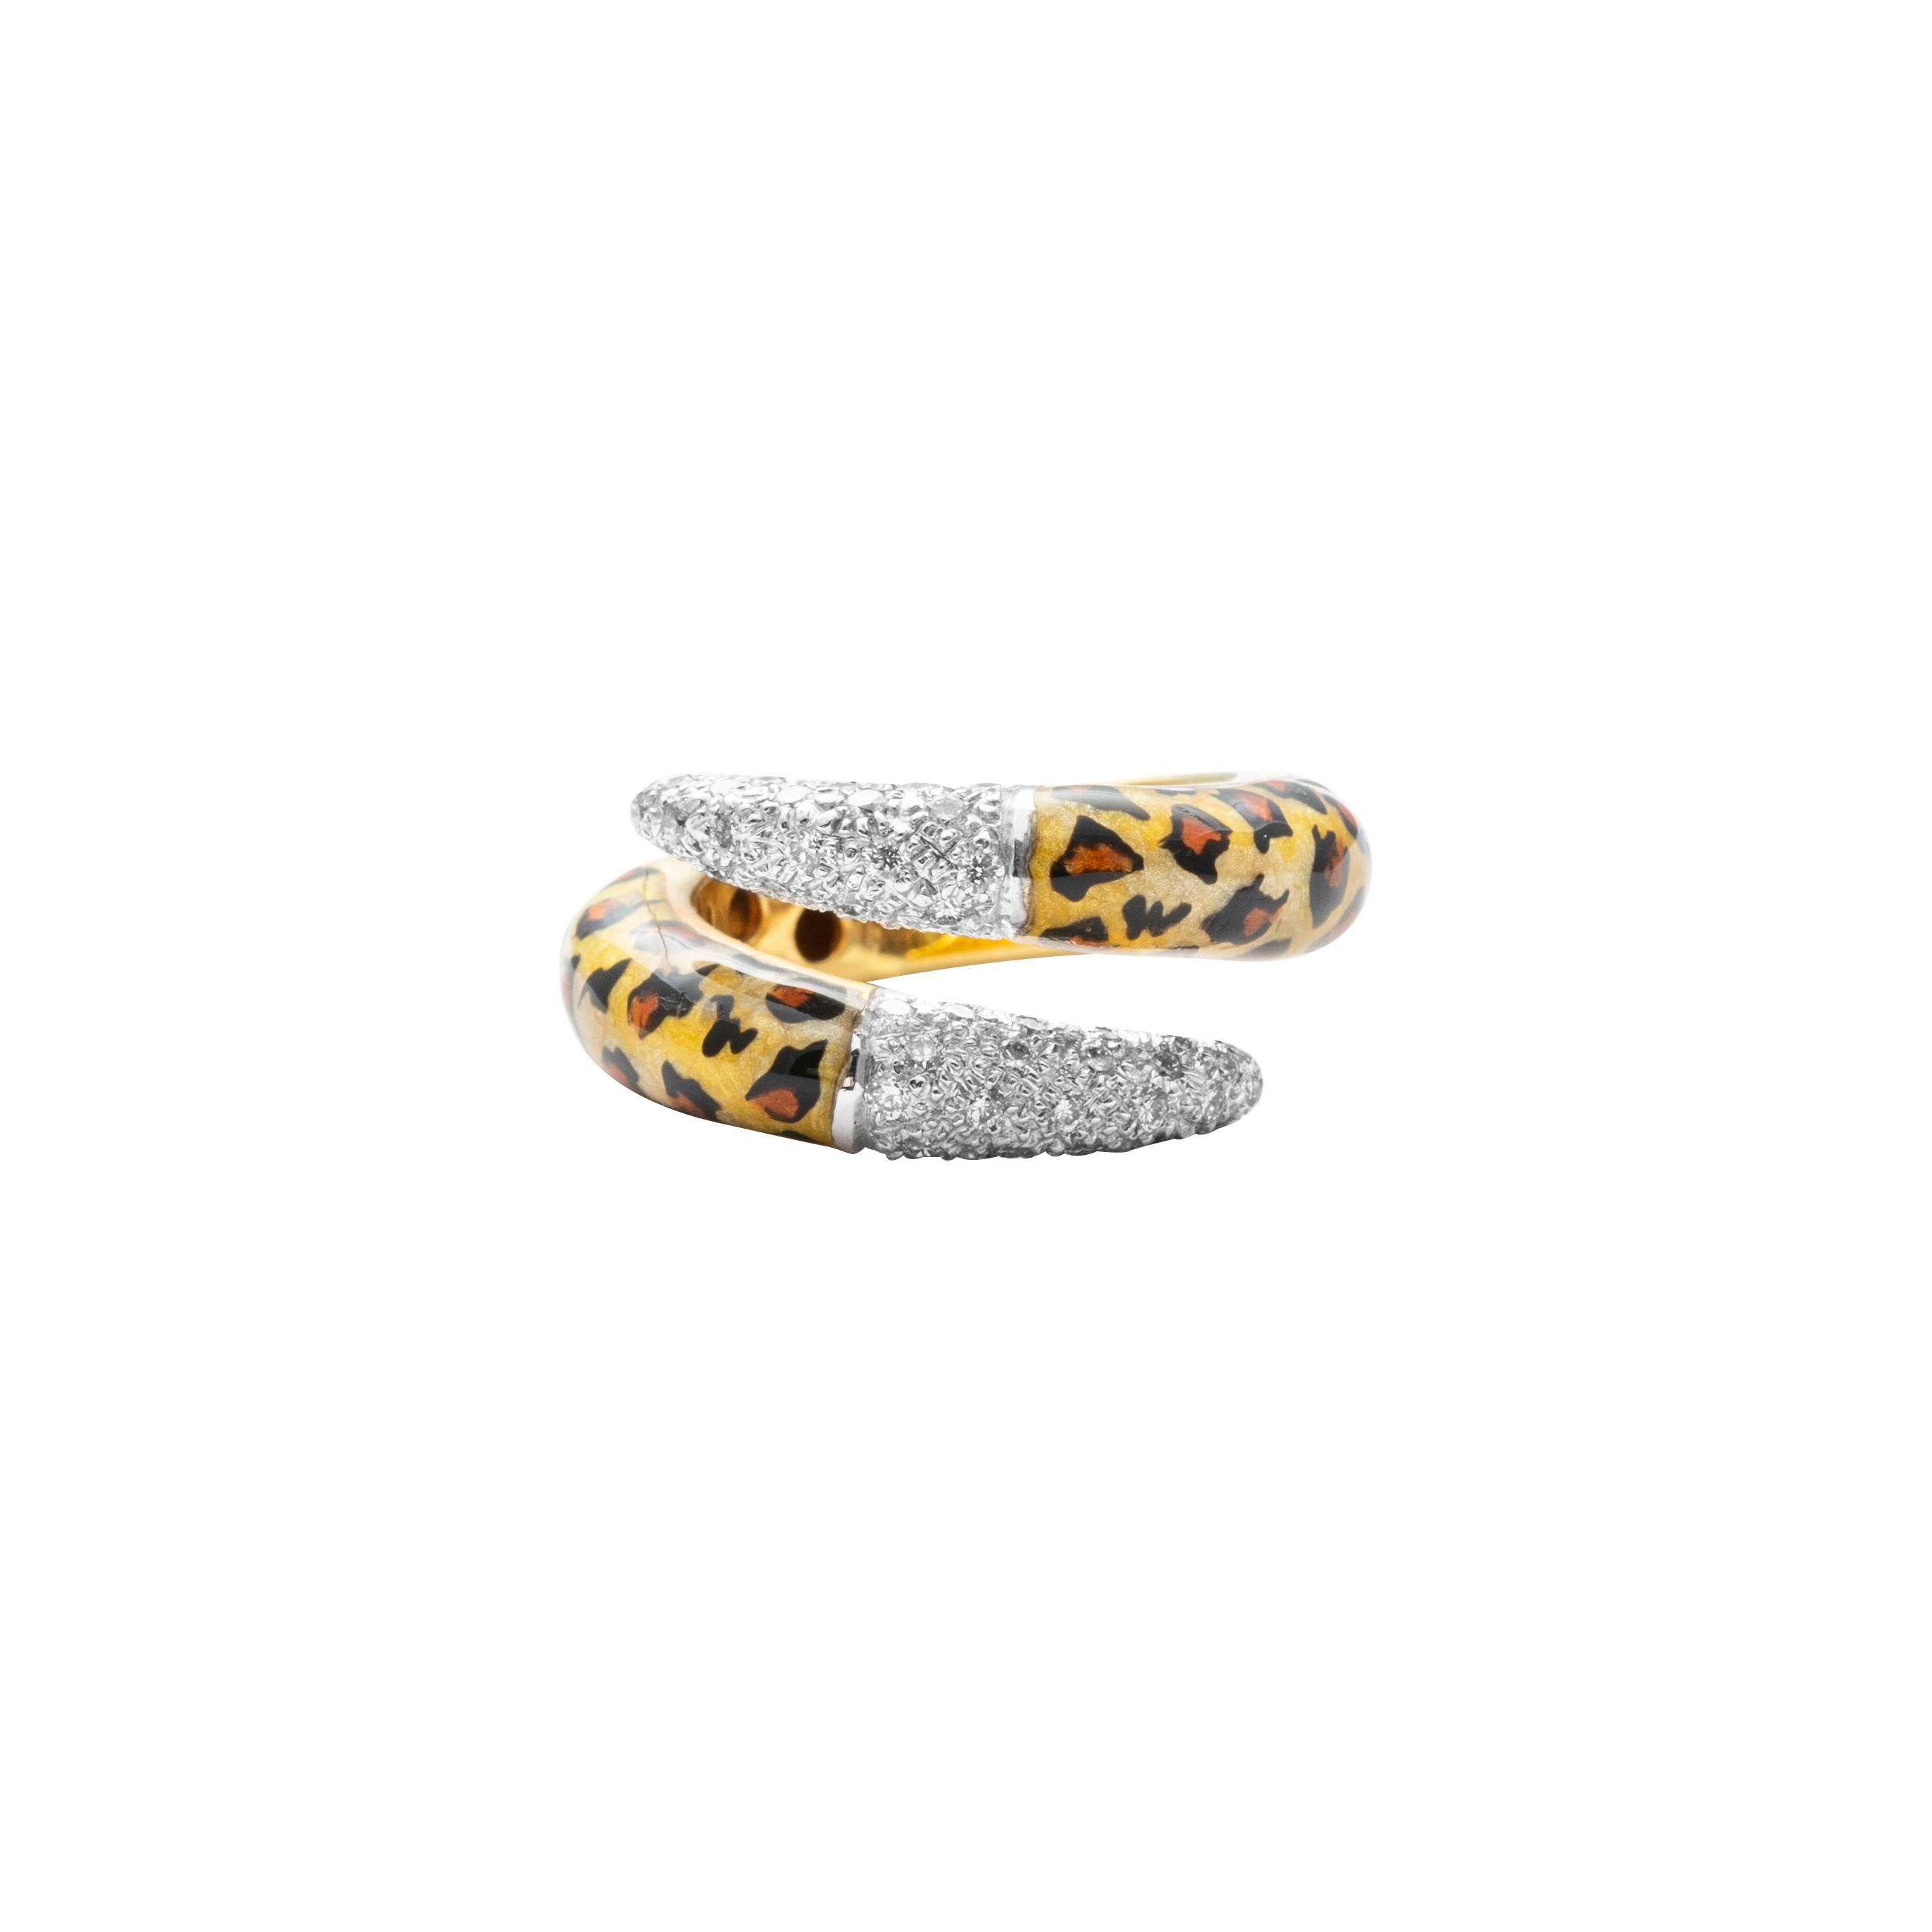 18 Karat Yellow Gold Diamond And Enamel Ring

Exquisitely crafted this beautiful ring is a perfect example of the fusion of enamel, diamonds and gold. The gorgeous animal print enamel work, and the white diamonds fuse together effortlessly to bring